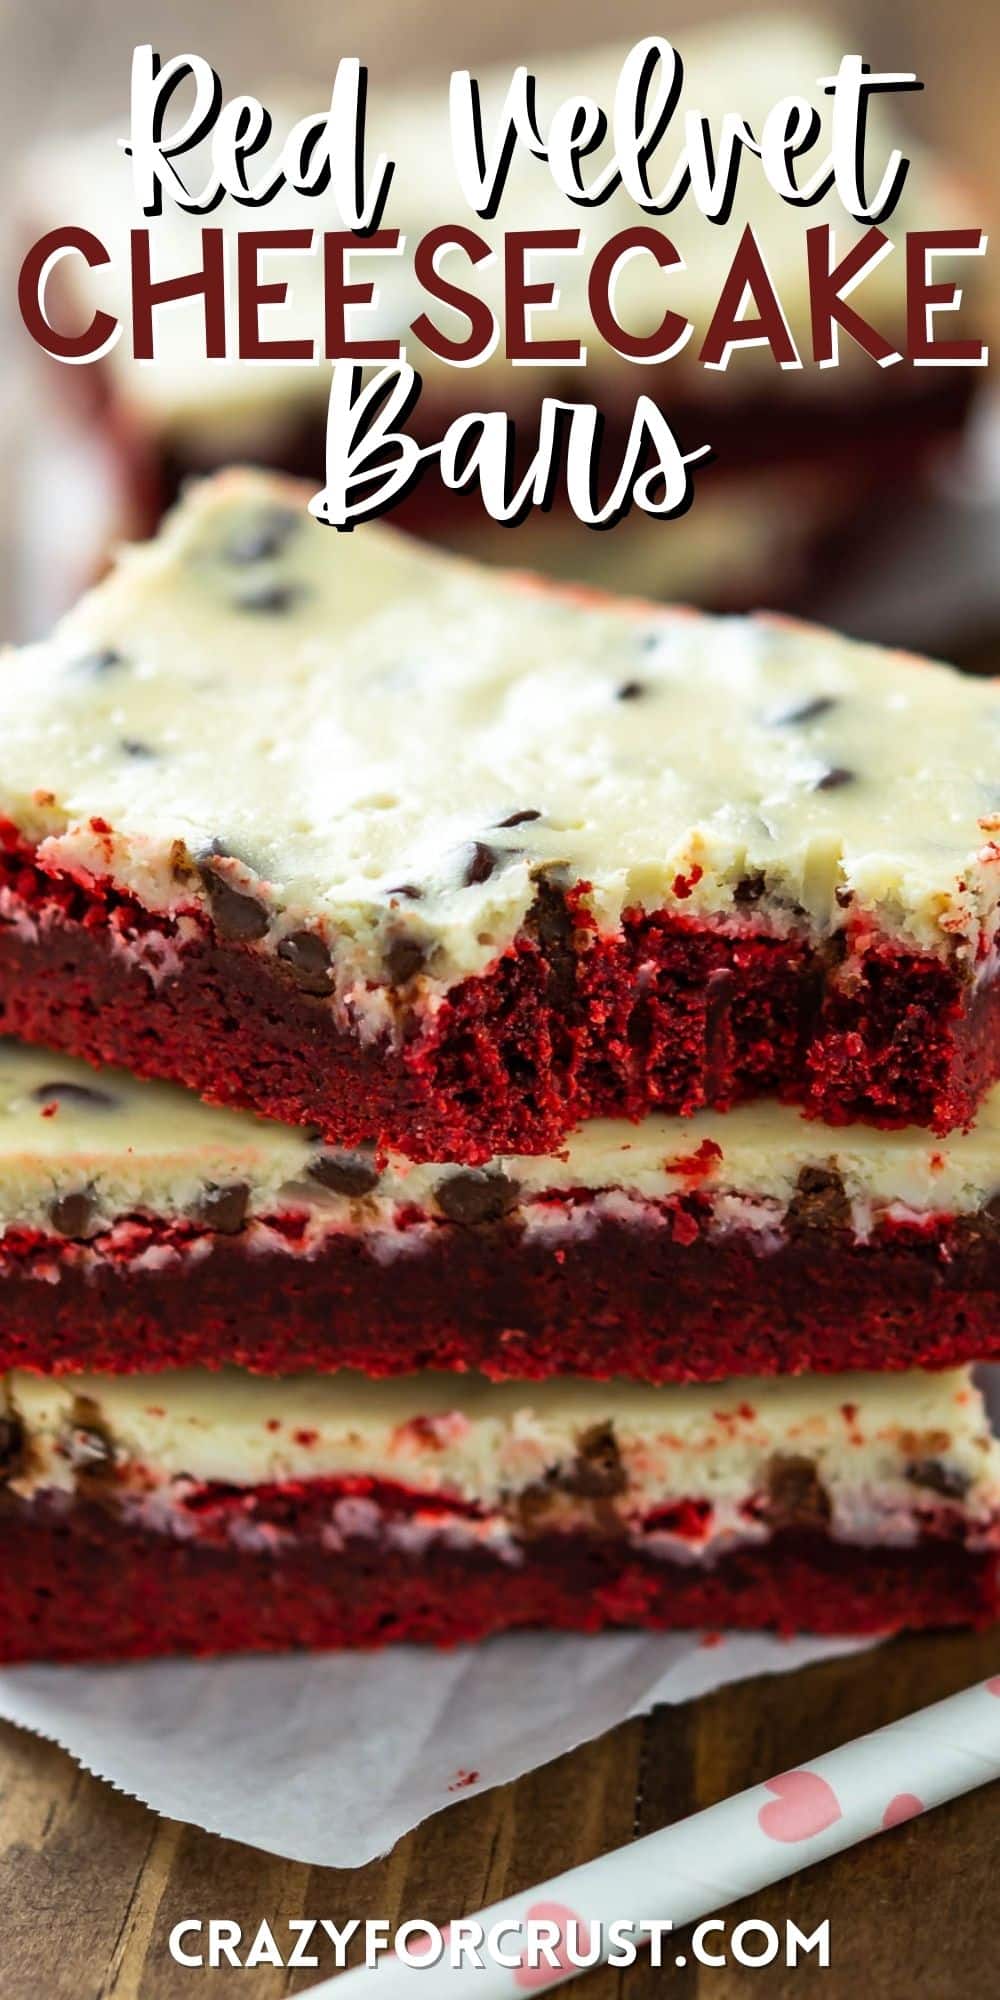 stacked red velvet bars with a yellow top of frosting with words on the image.